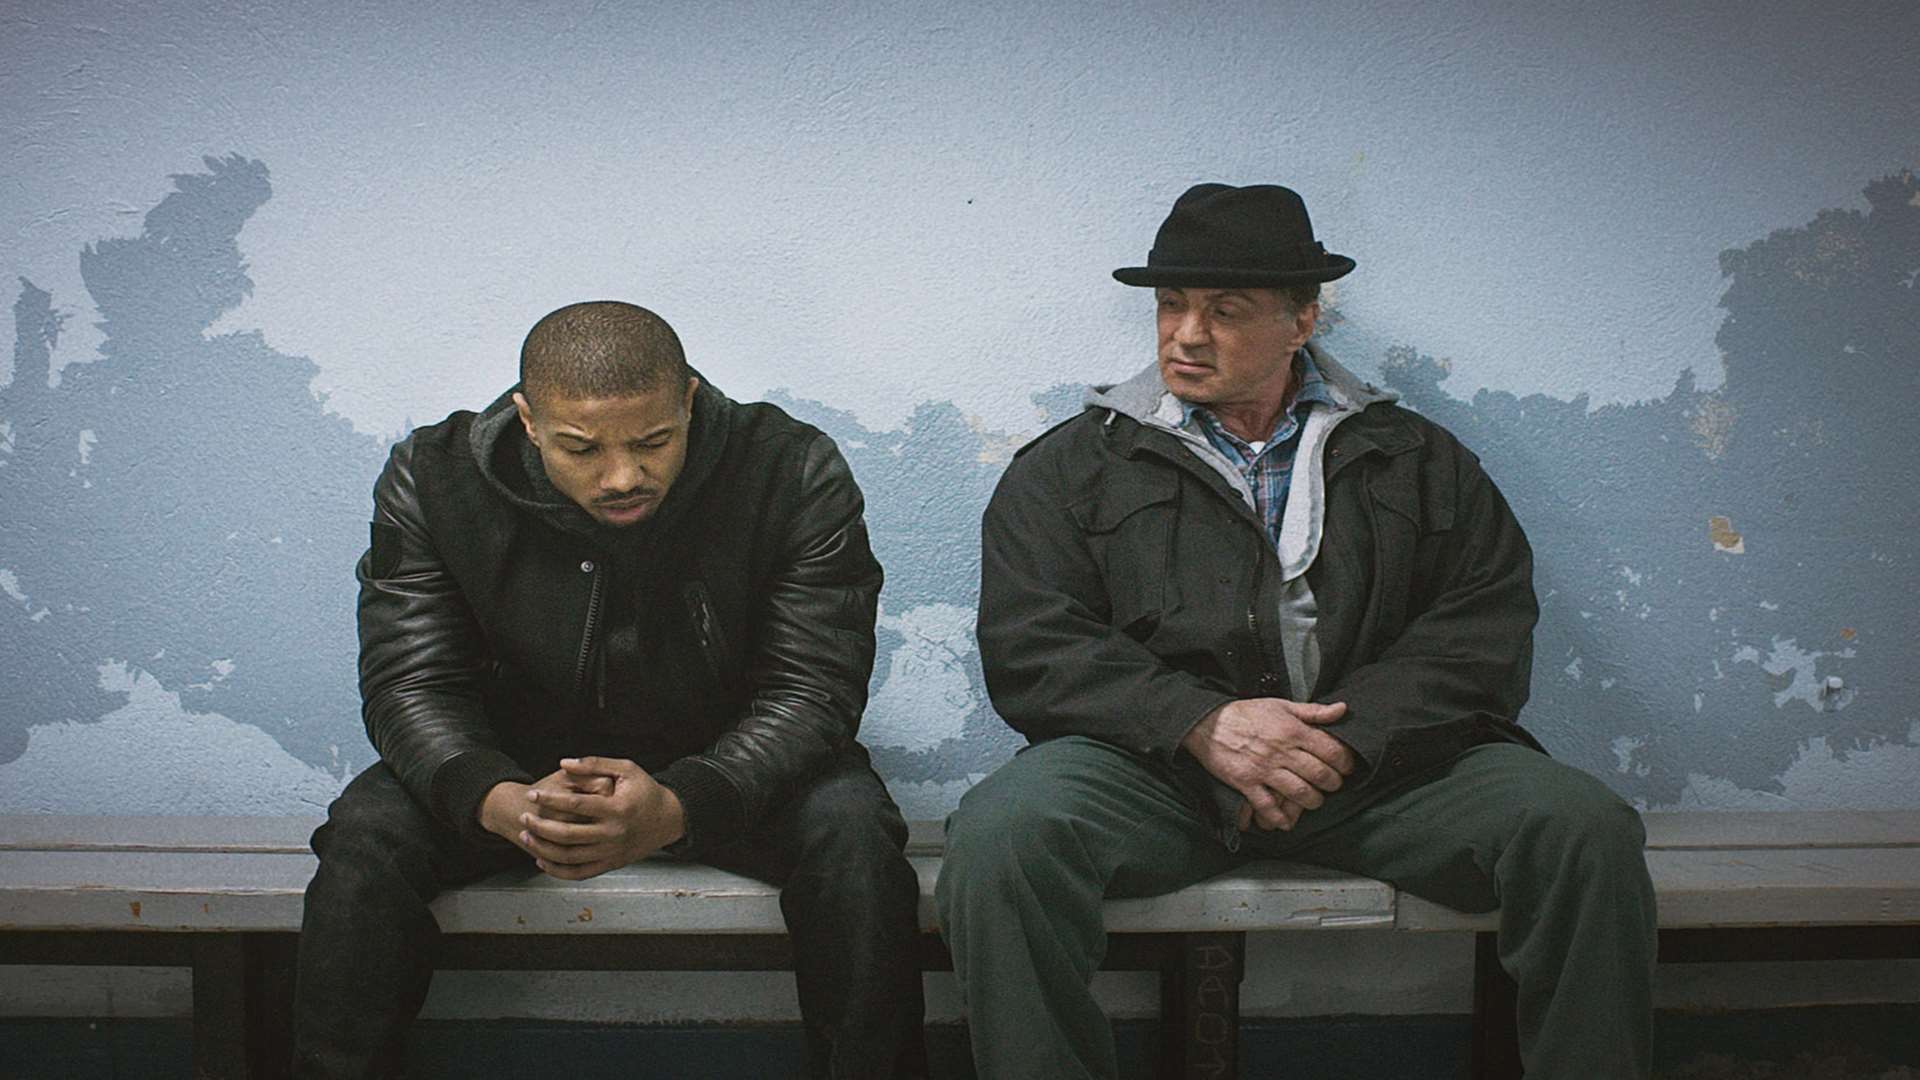 Michael B Jordan as Adonis Creed and Sylvester Stallone as Rocky Balboa. Picture: PA Photo/Warner Bros